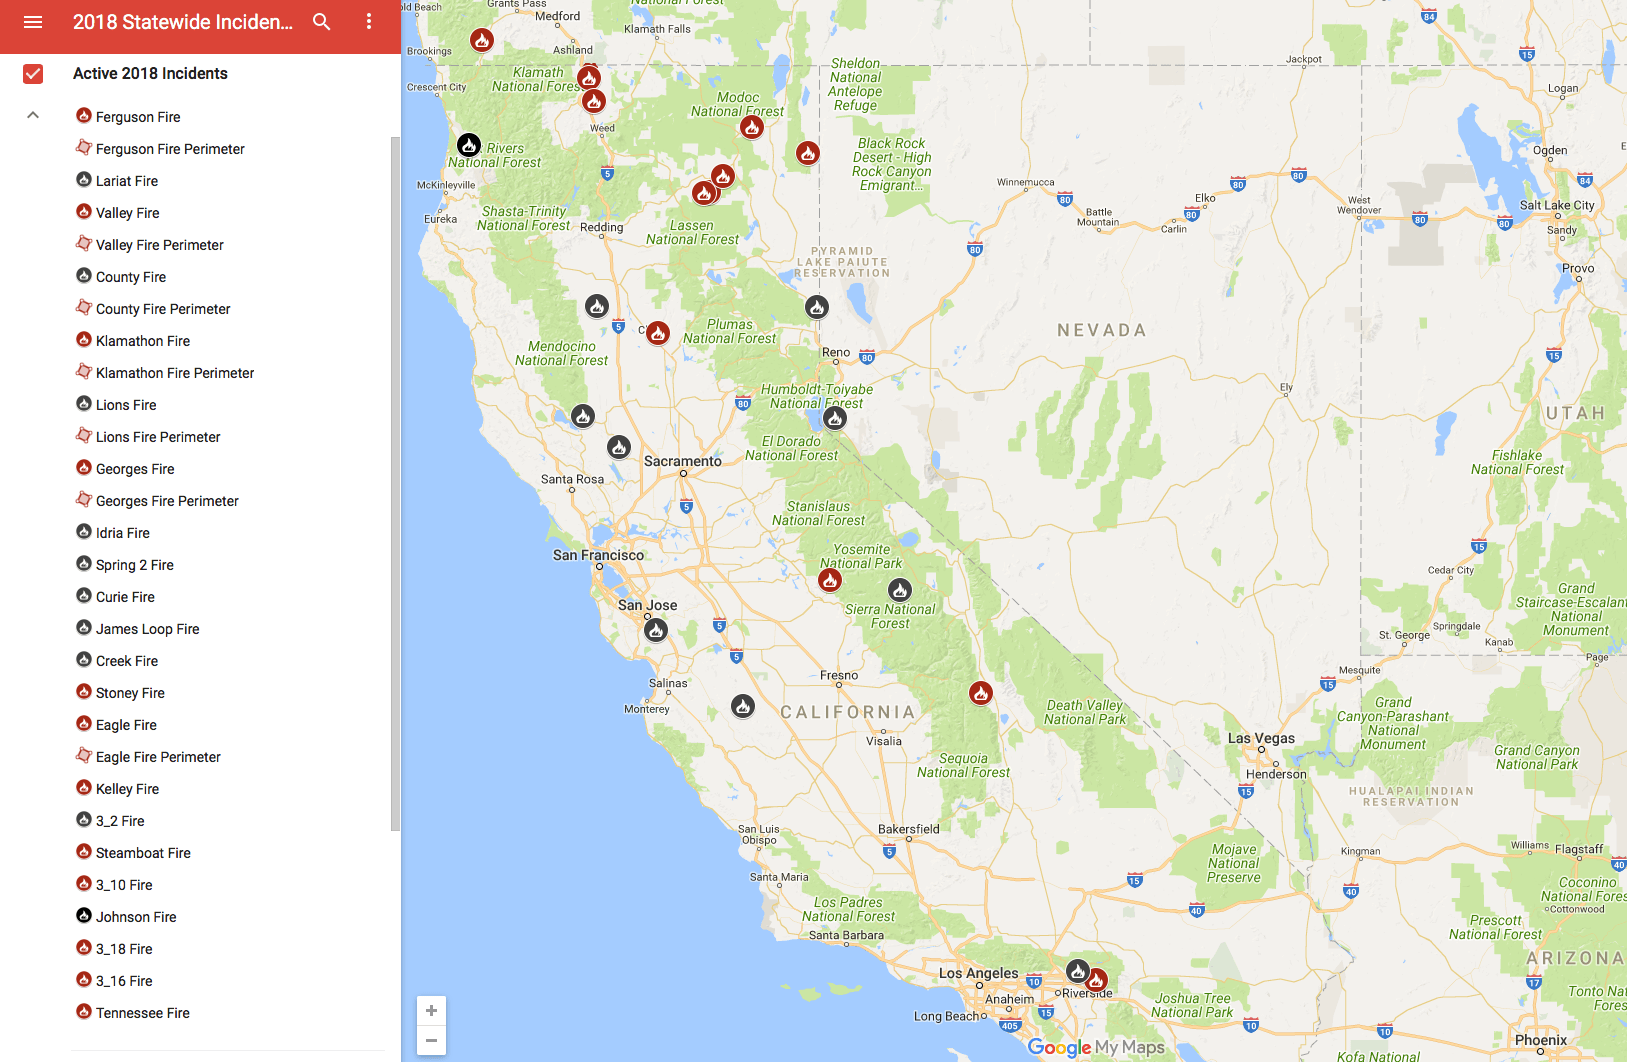 56 Active Wildfires Burning Across the West Taking Lives, Destroying ...